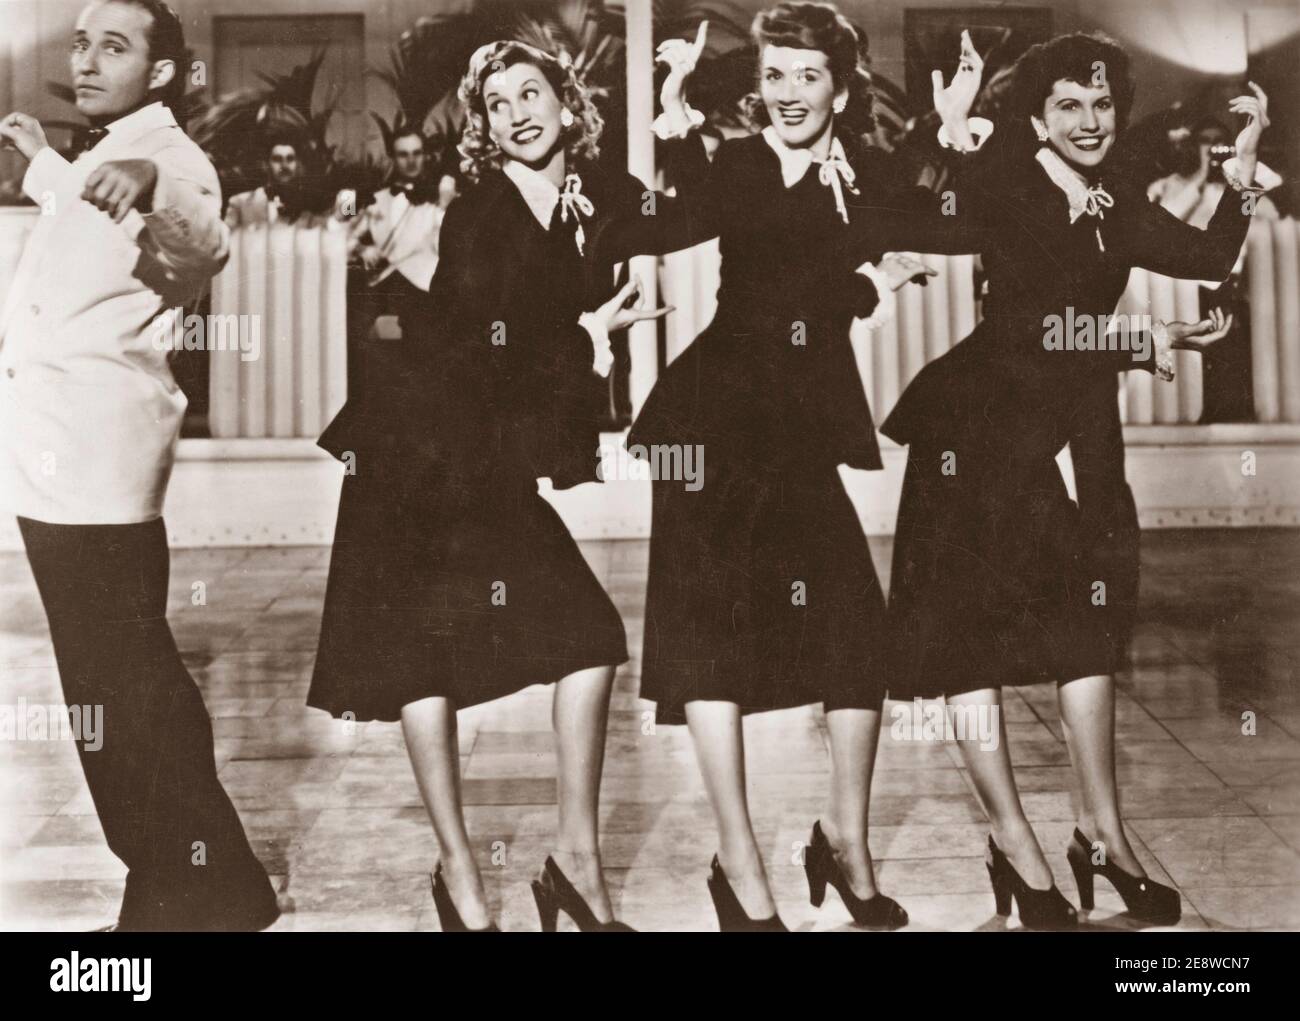 The Andrew Sisters. An American close harmony singing group of the swing and boogie-woogie eras. The group consisted of three sisters: contralto LaVerne Sophia (July 6, 1911 – May 8, 1967), soprano Maxene Anglyn (January 3, 1916 – October 21, 1995), and mezzo-soprano Patricia Marie 'Patty' (February 16, 1918 – January 30, 2013). Pictured here in the american comedy film Road to Rio 1947 that starred Bing Crosby. It had premiere december 25 1947. Stock Photo